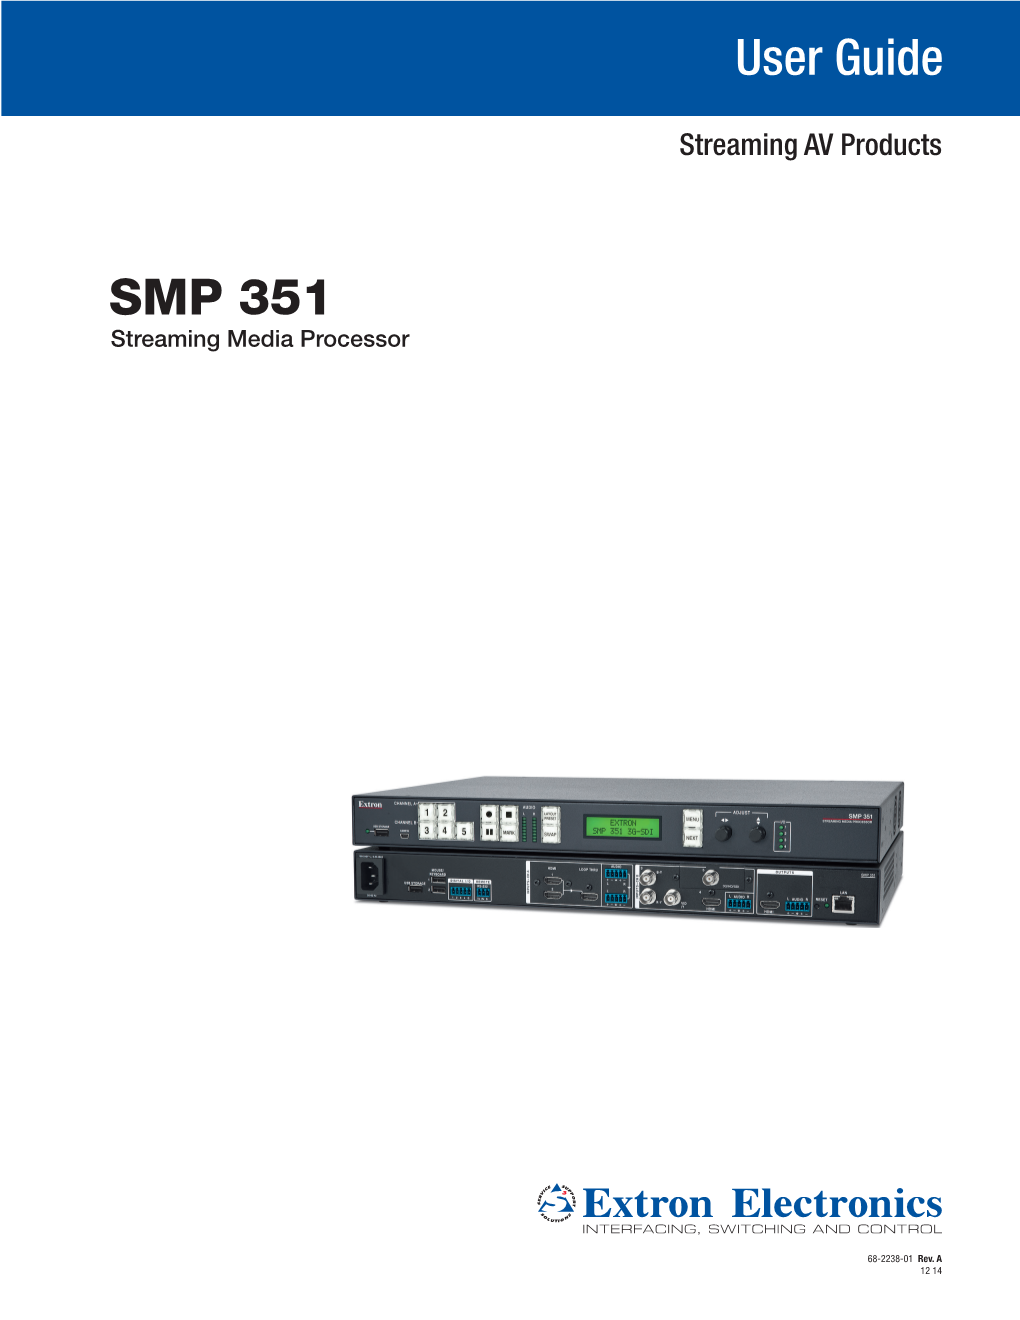 SMP 351 User Guide